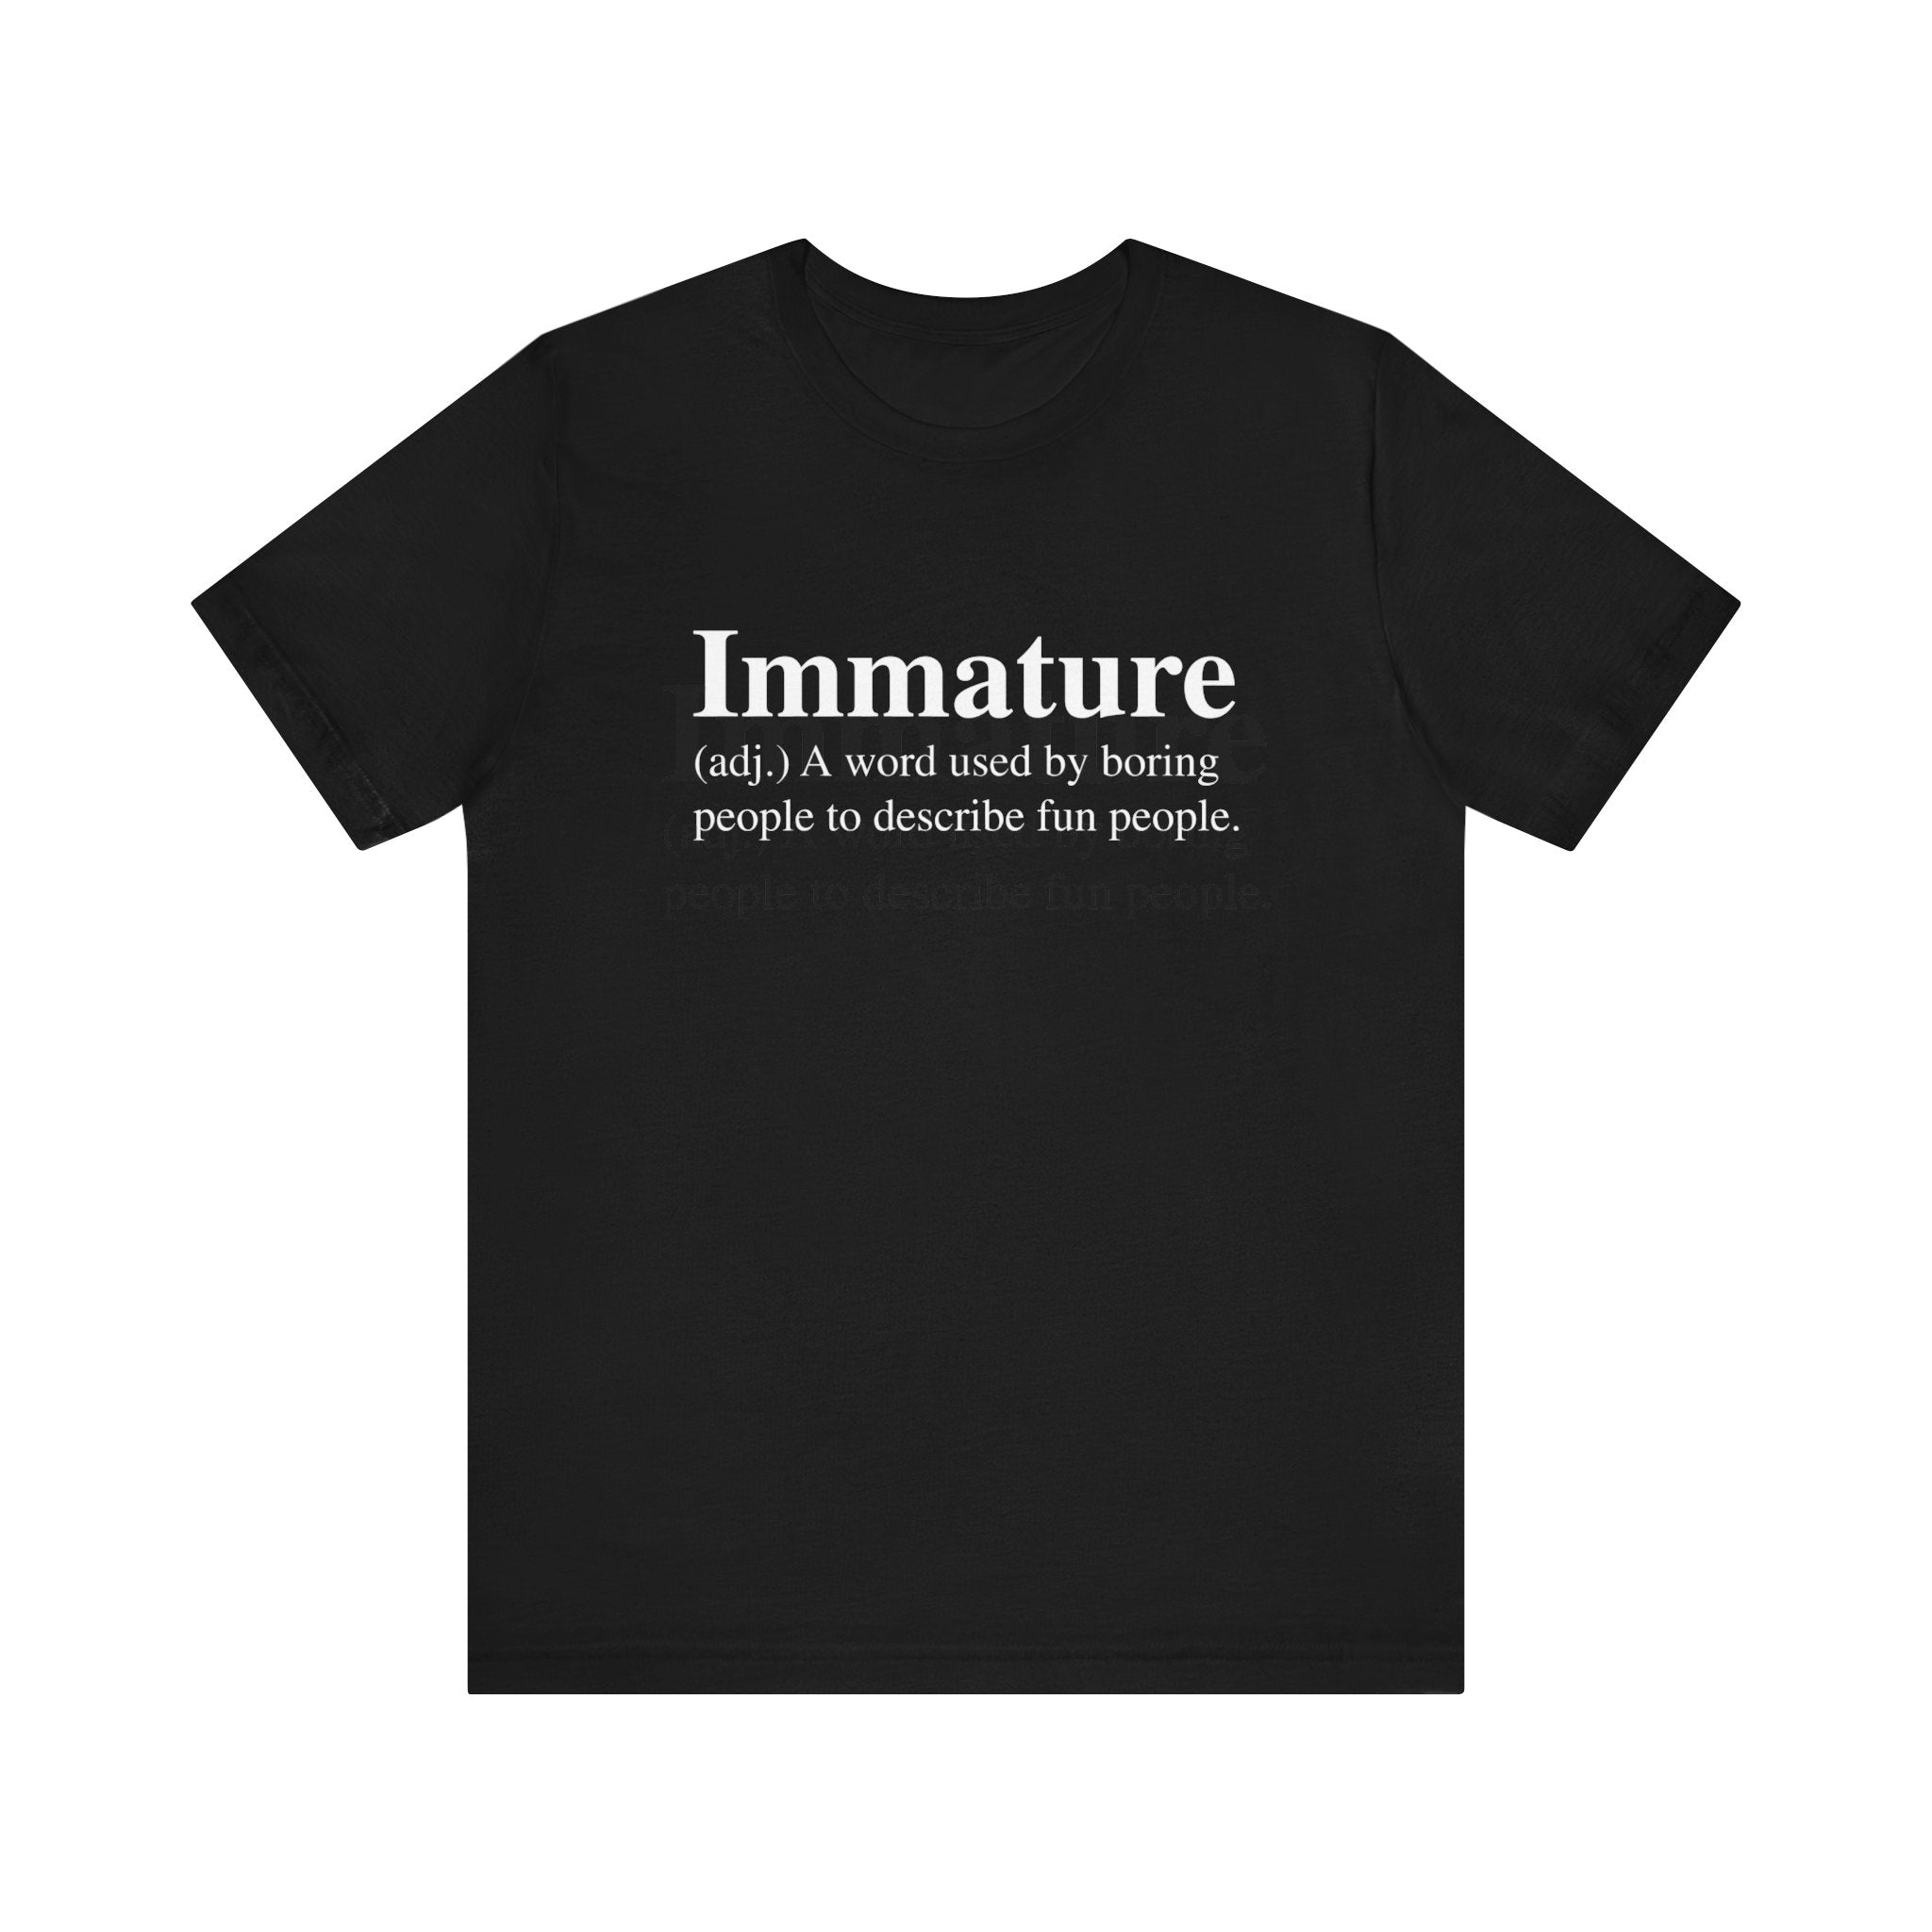 Unisex jersey tee with the word "Immature T-Shirt" and its humorous definition printed in quality white text on the front.